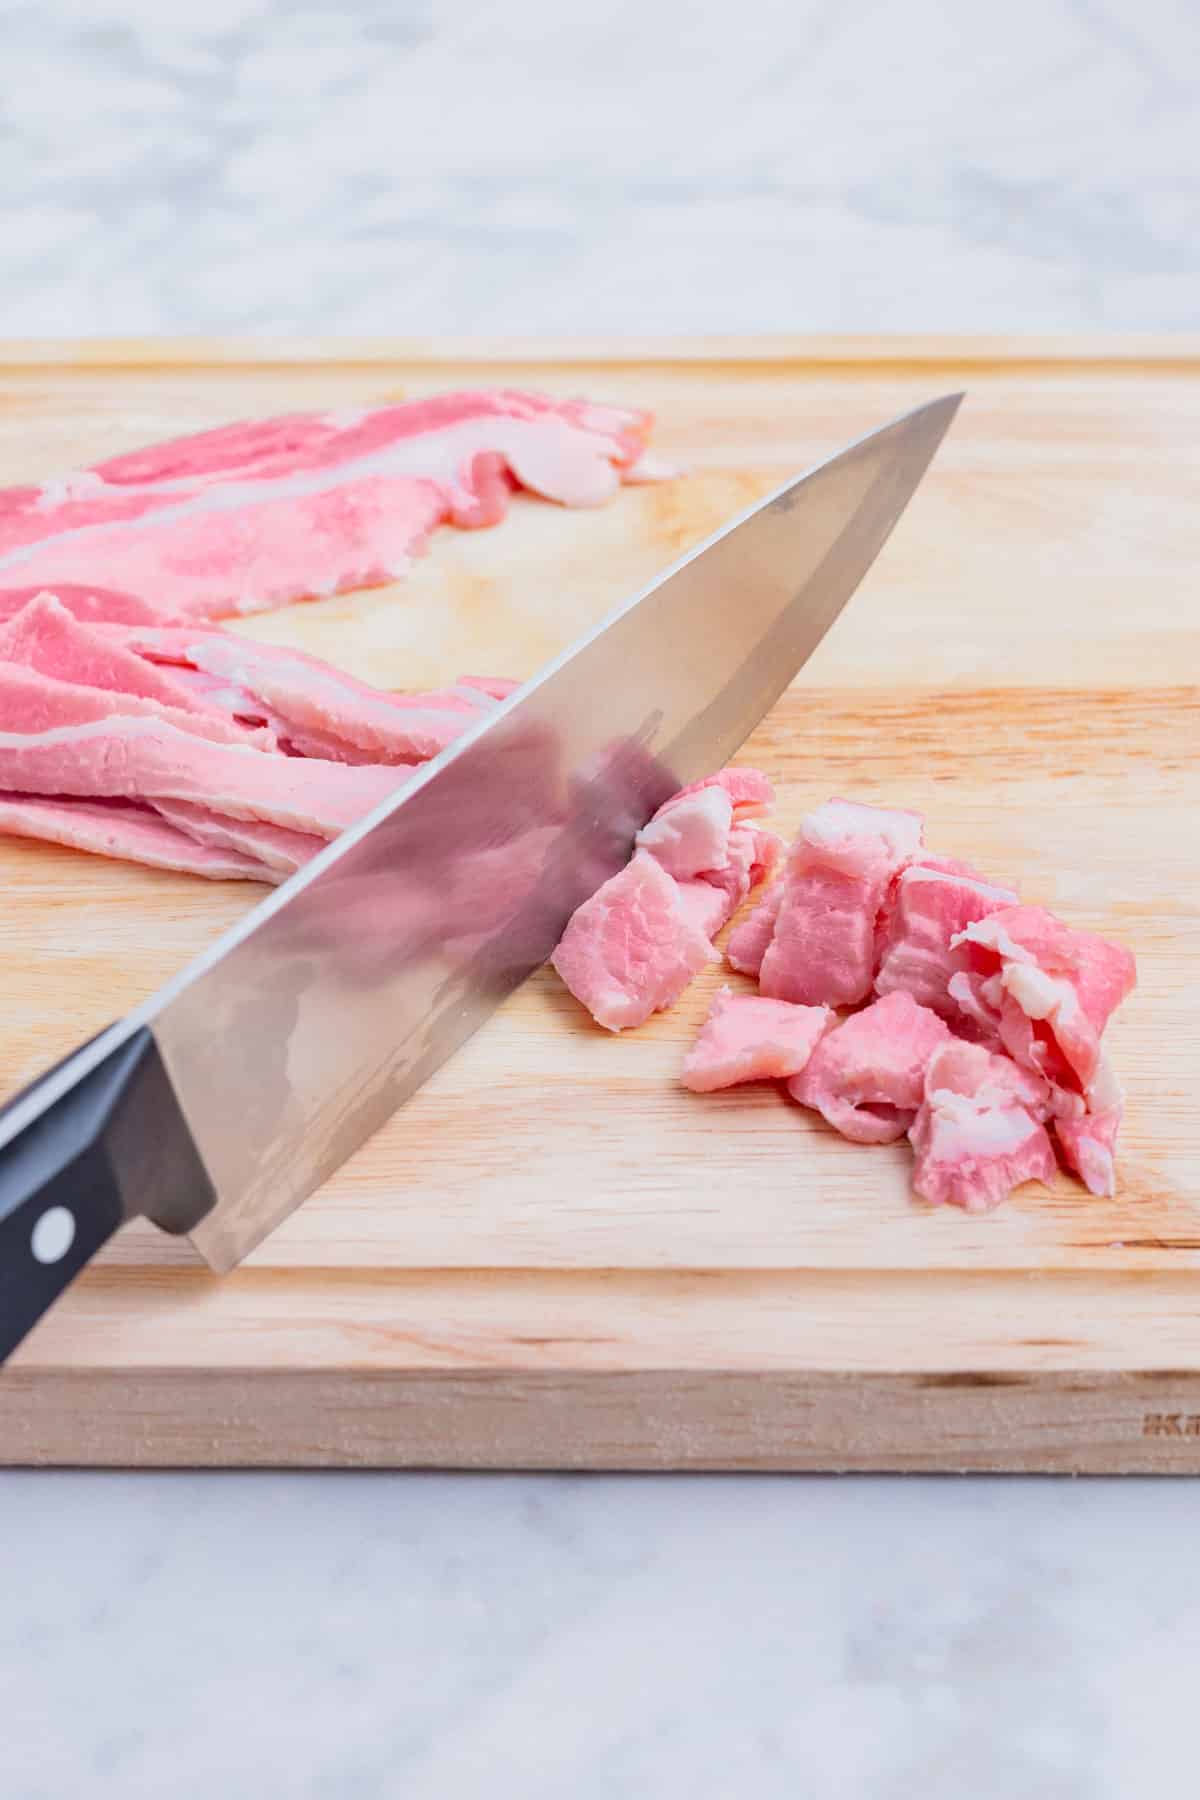 Bacon is sliced by a sharp knife.